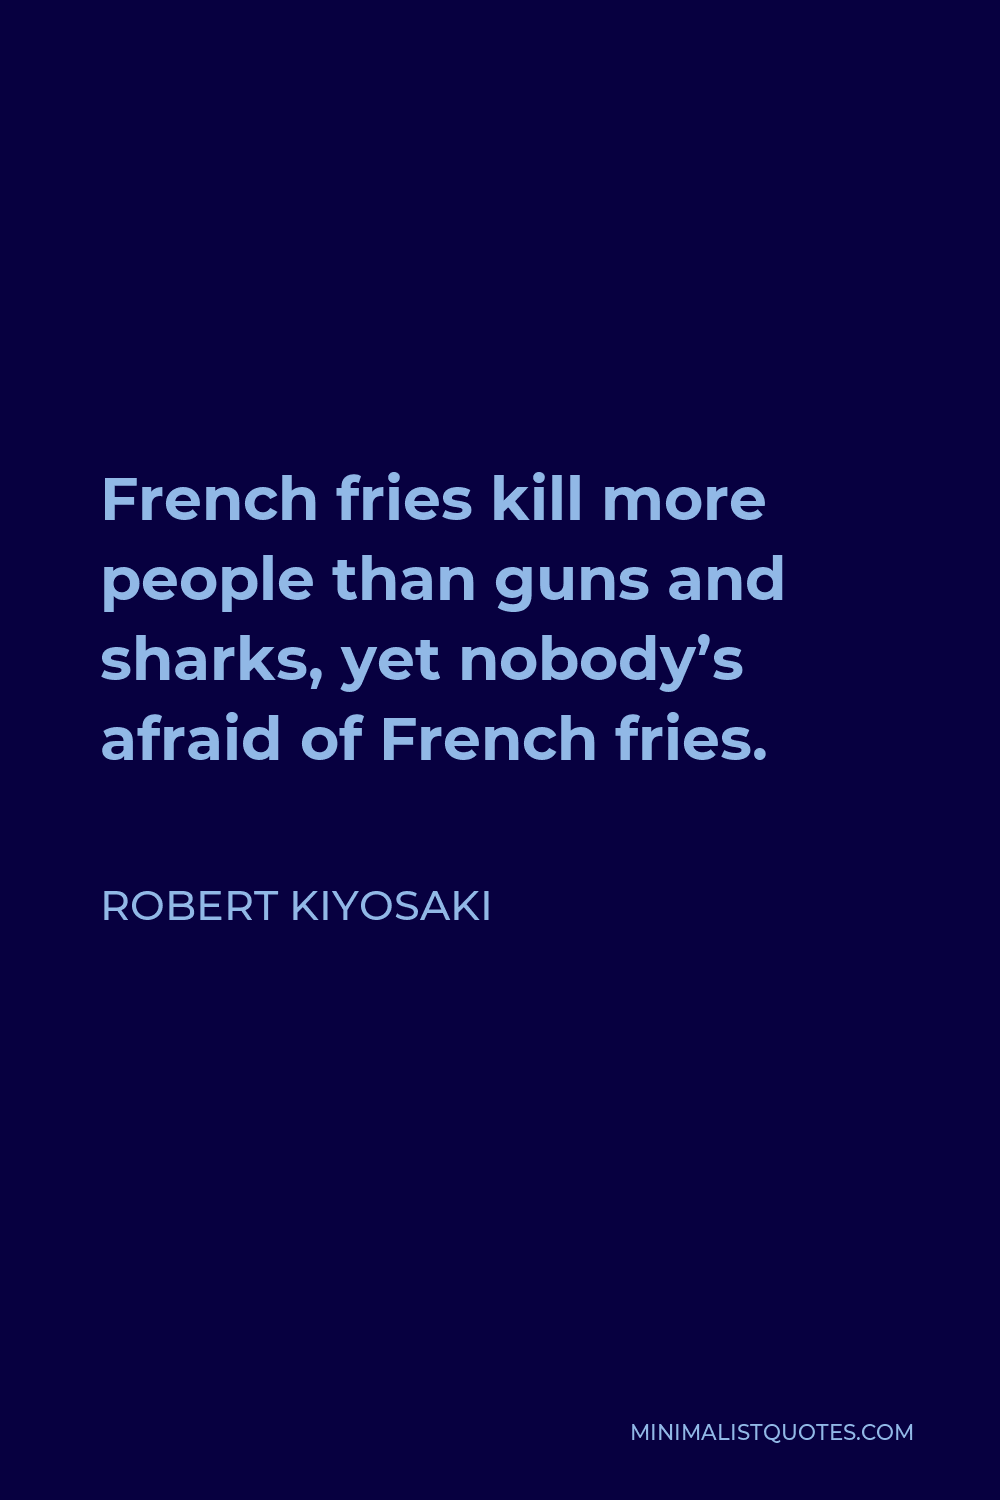 Robert Kiyosaki Quote - French fries kill more people than guns and sharks, yet nobody’s afraid of French fries.